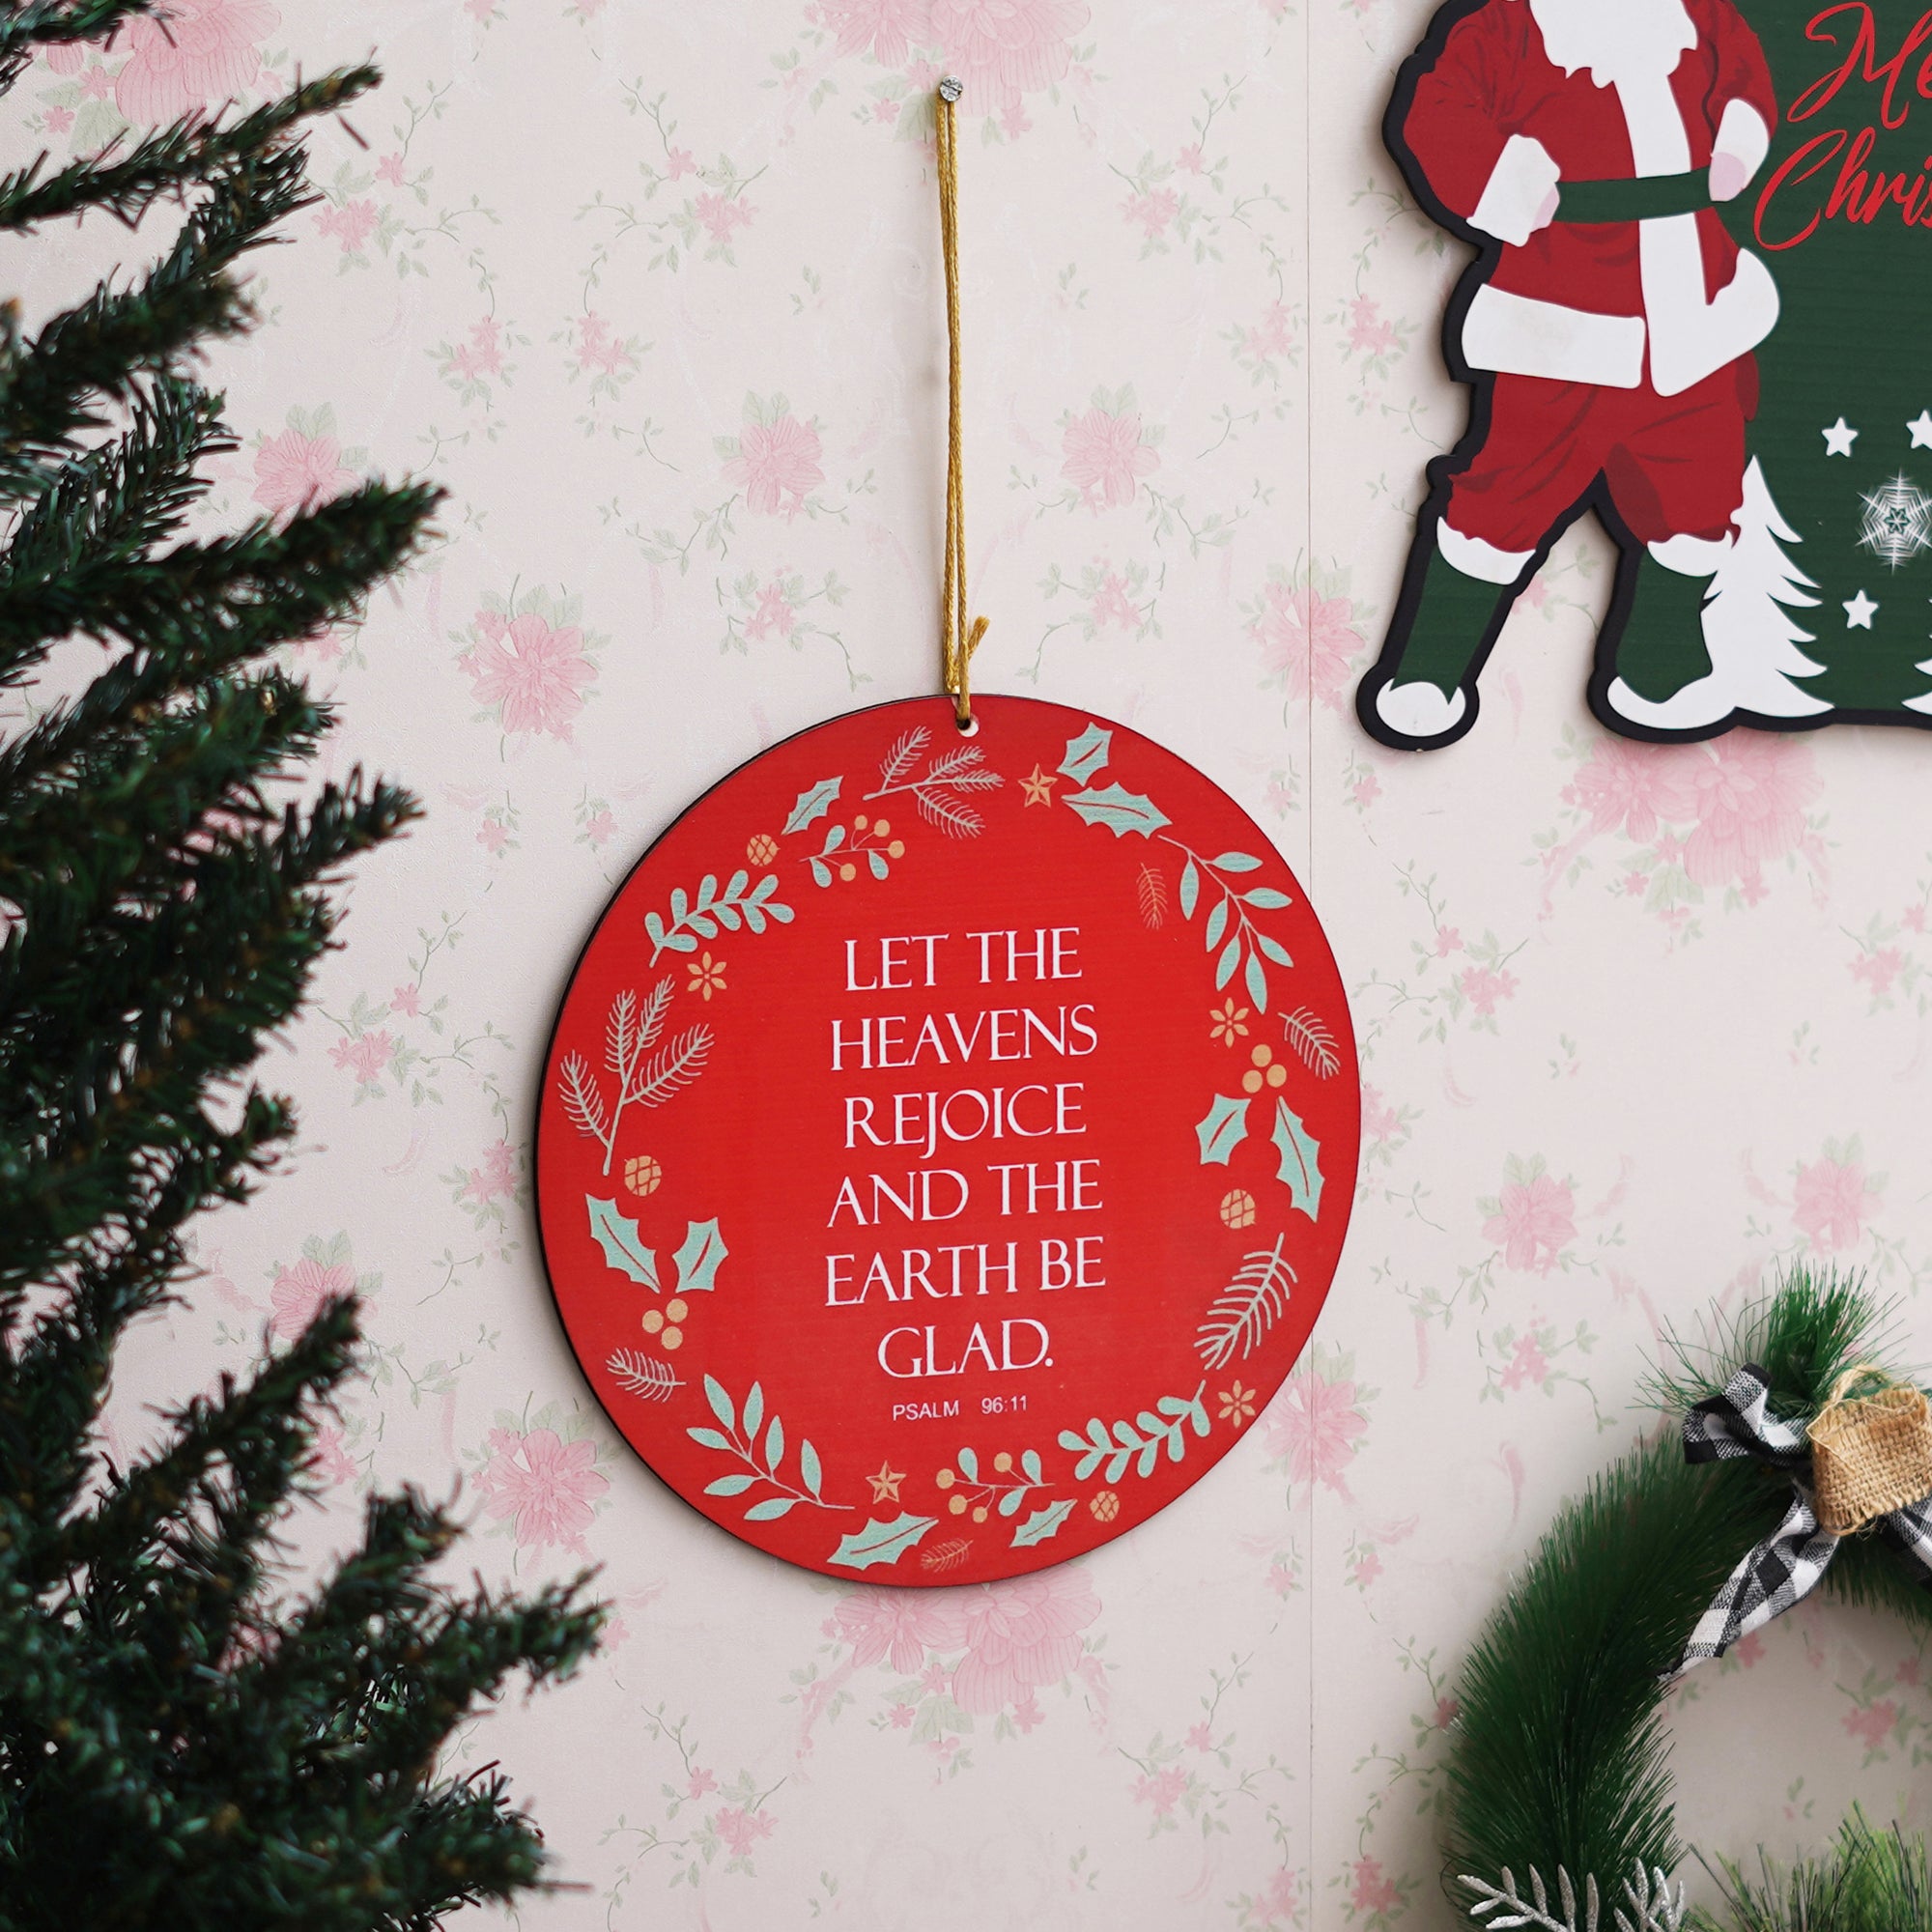 eCraftIndia "LET THE HEAVENS REJOICE AND THE EARTH BE GLAD. PSALM 96:11" Printed Merry Christmas Wooden Door Wall Hanging Ornaments for Home Decoration (Red, Green, White) 4